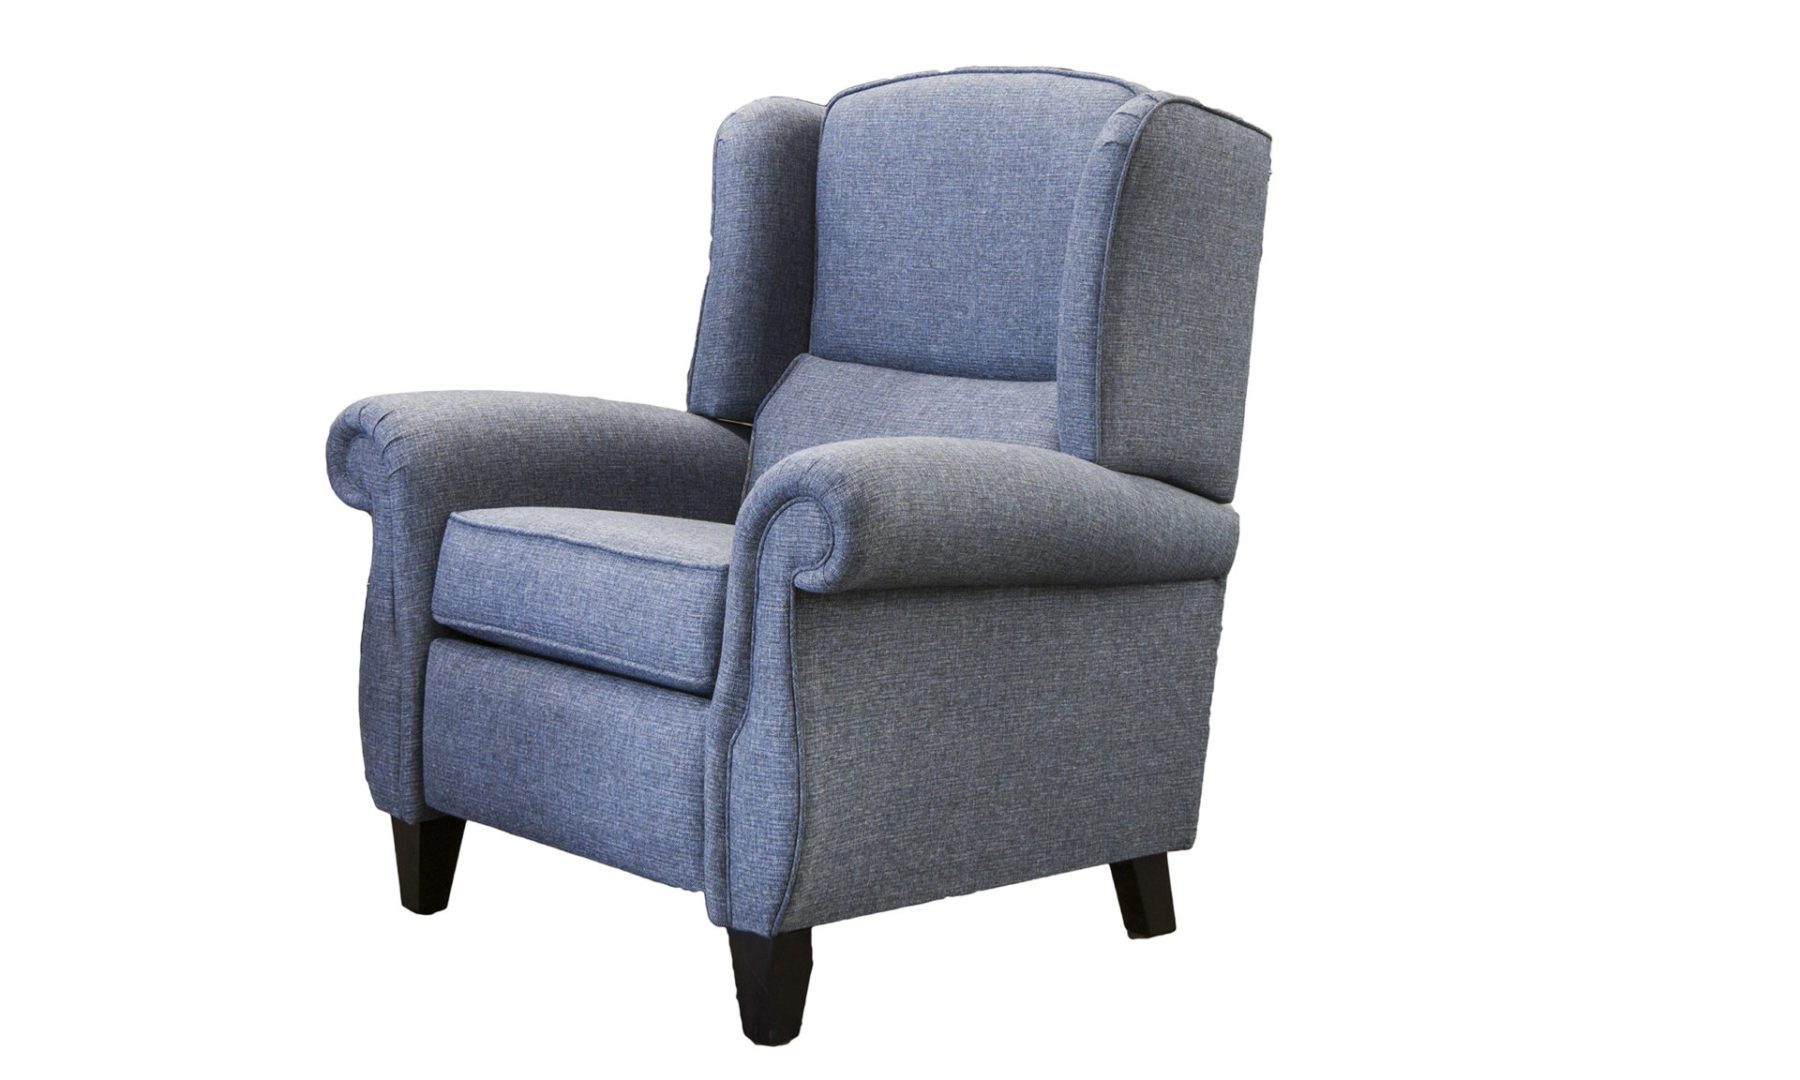 Greville Recliner Chair in Ado Marine, Bronze Collection Fabric